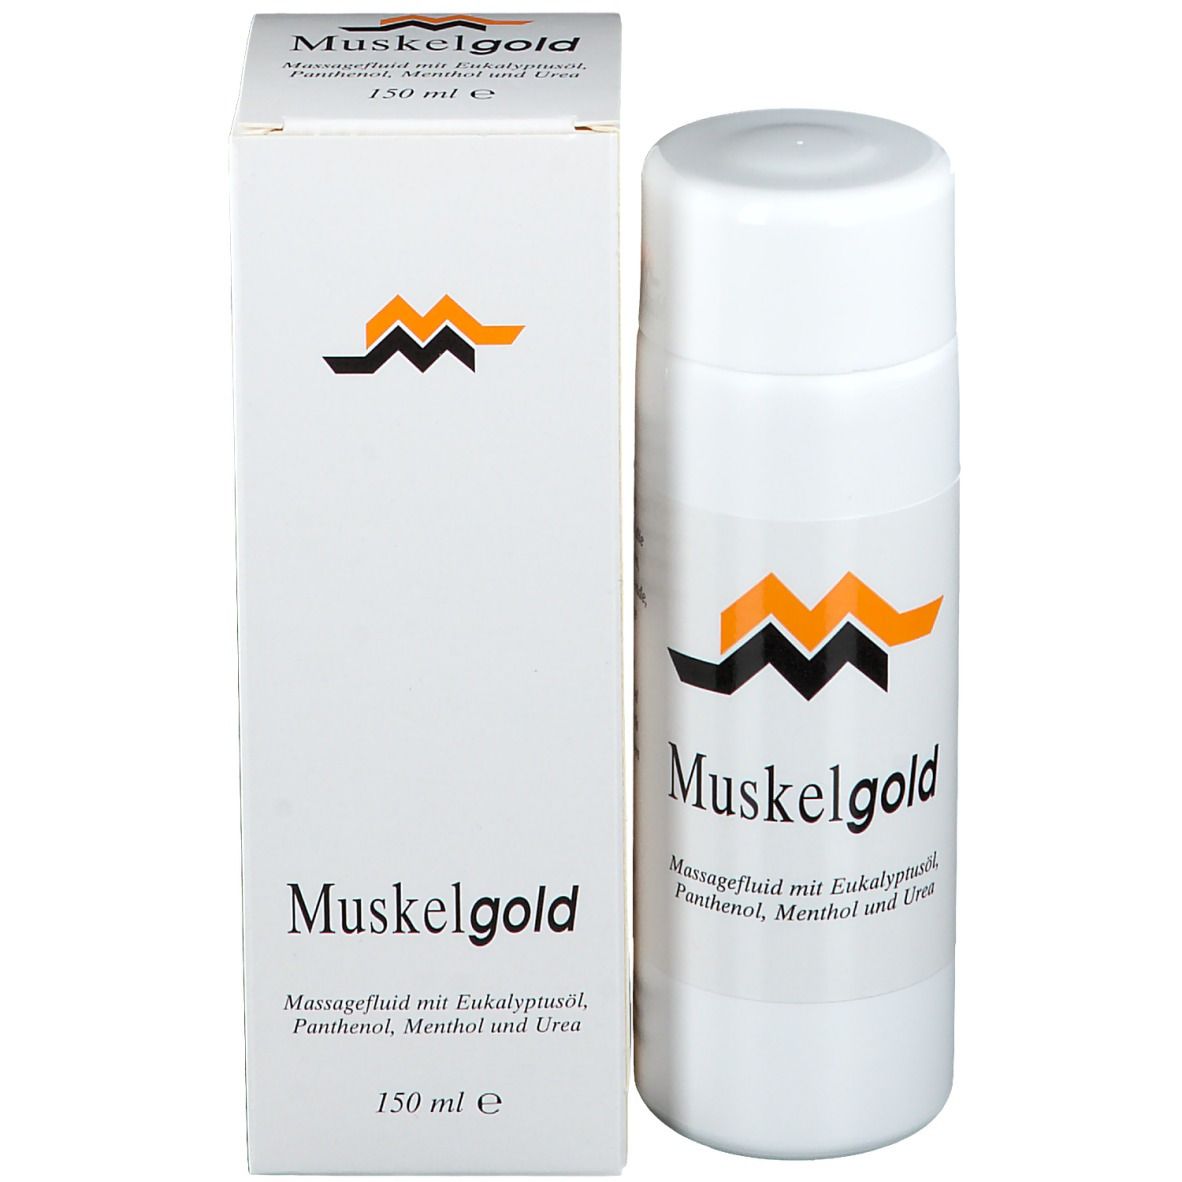 Muskelgold